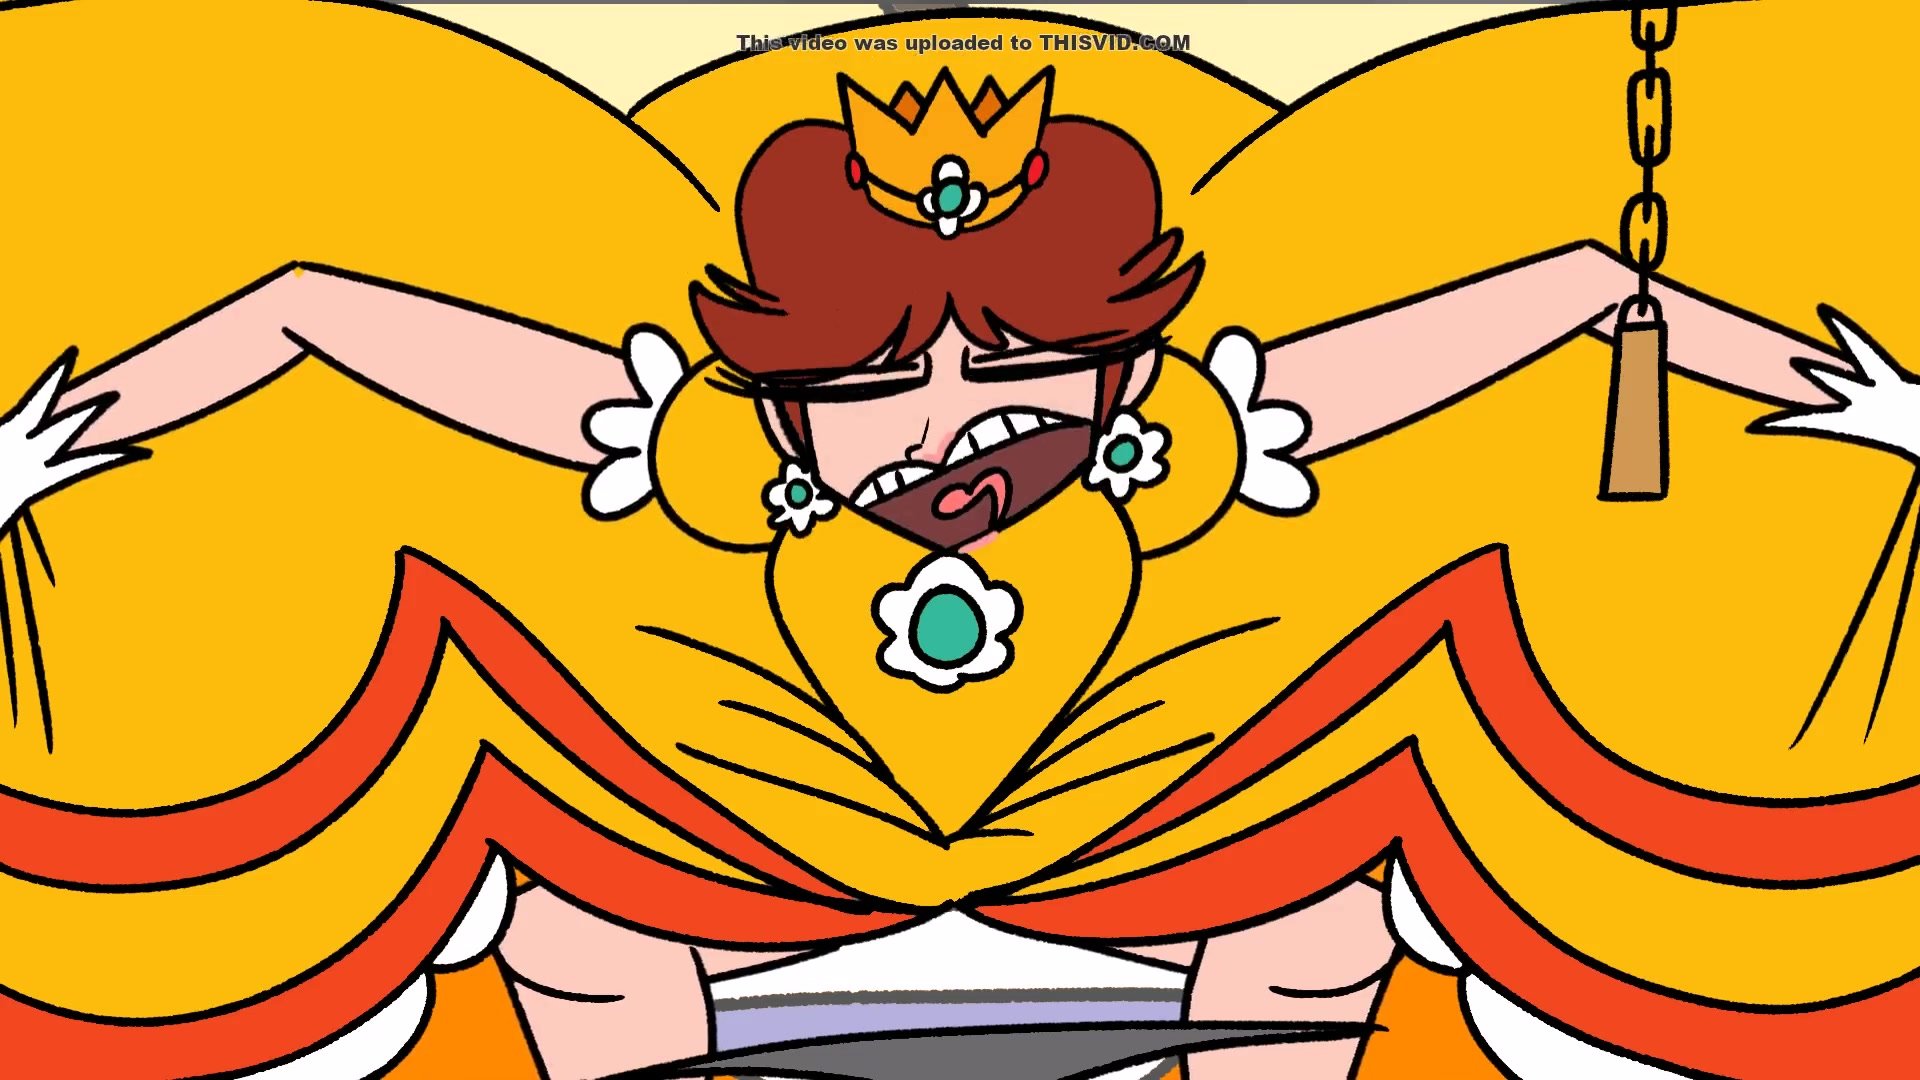 Princess Peach Animated Cartoons - Animation) Peach can't hold it in - ThisVid.com